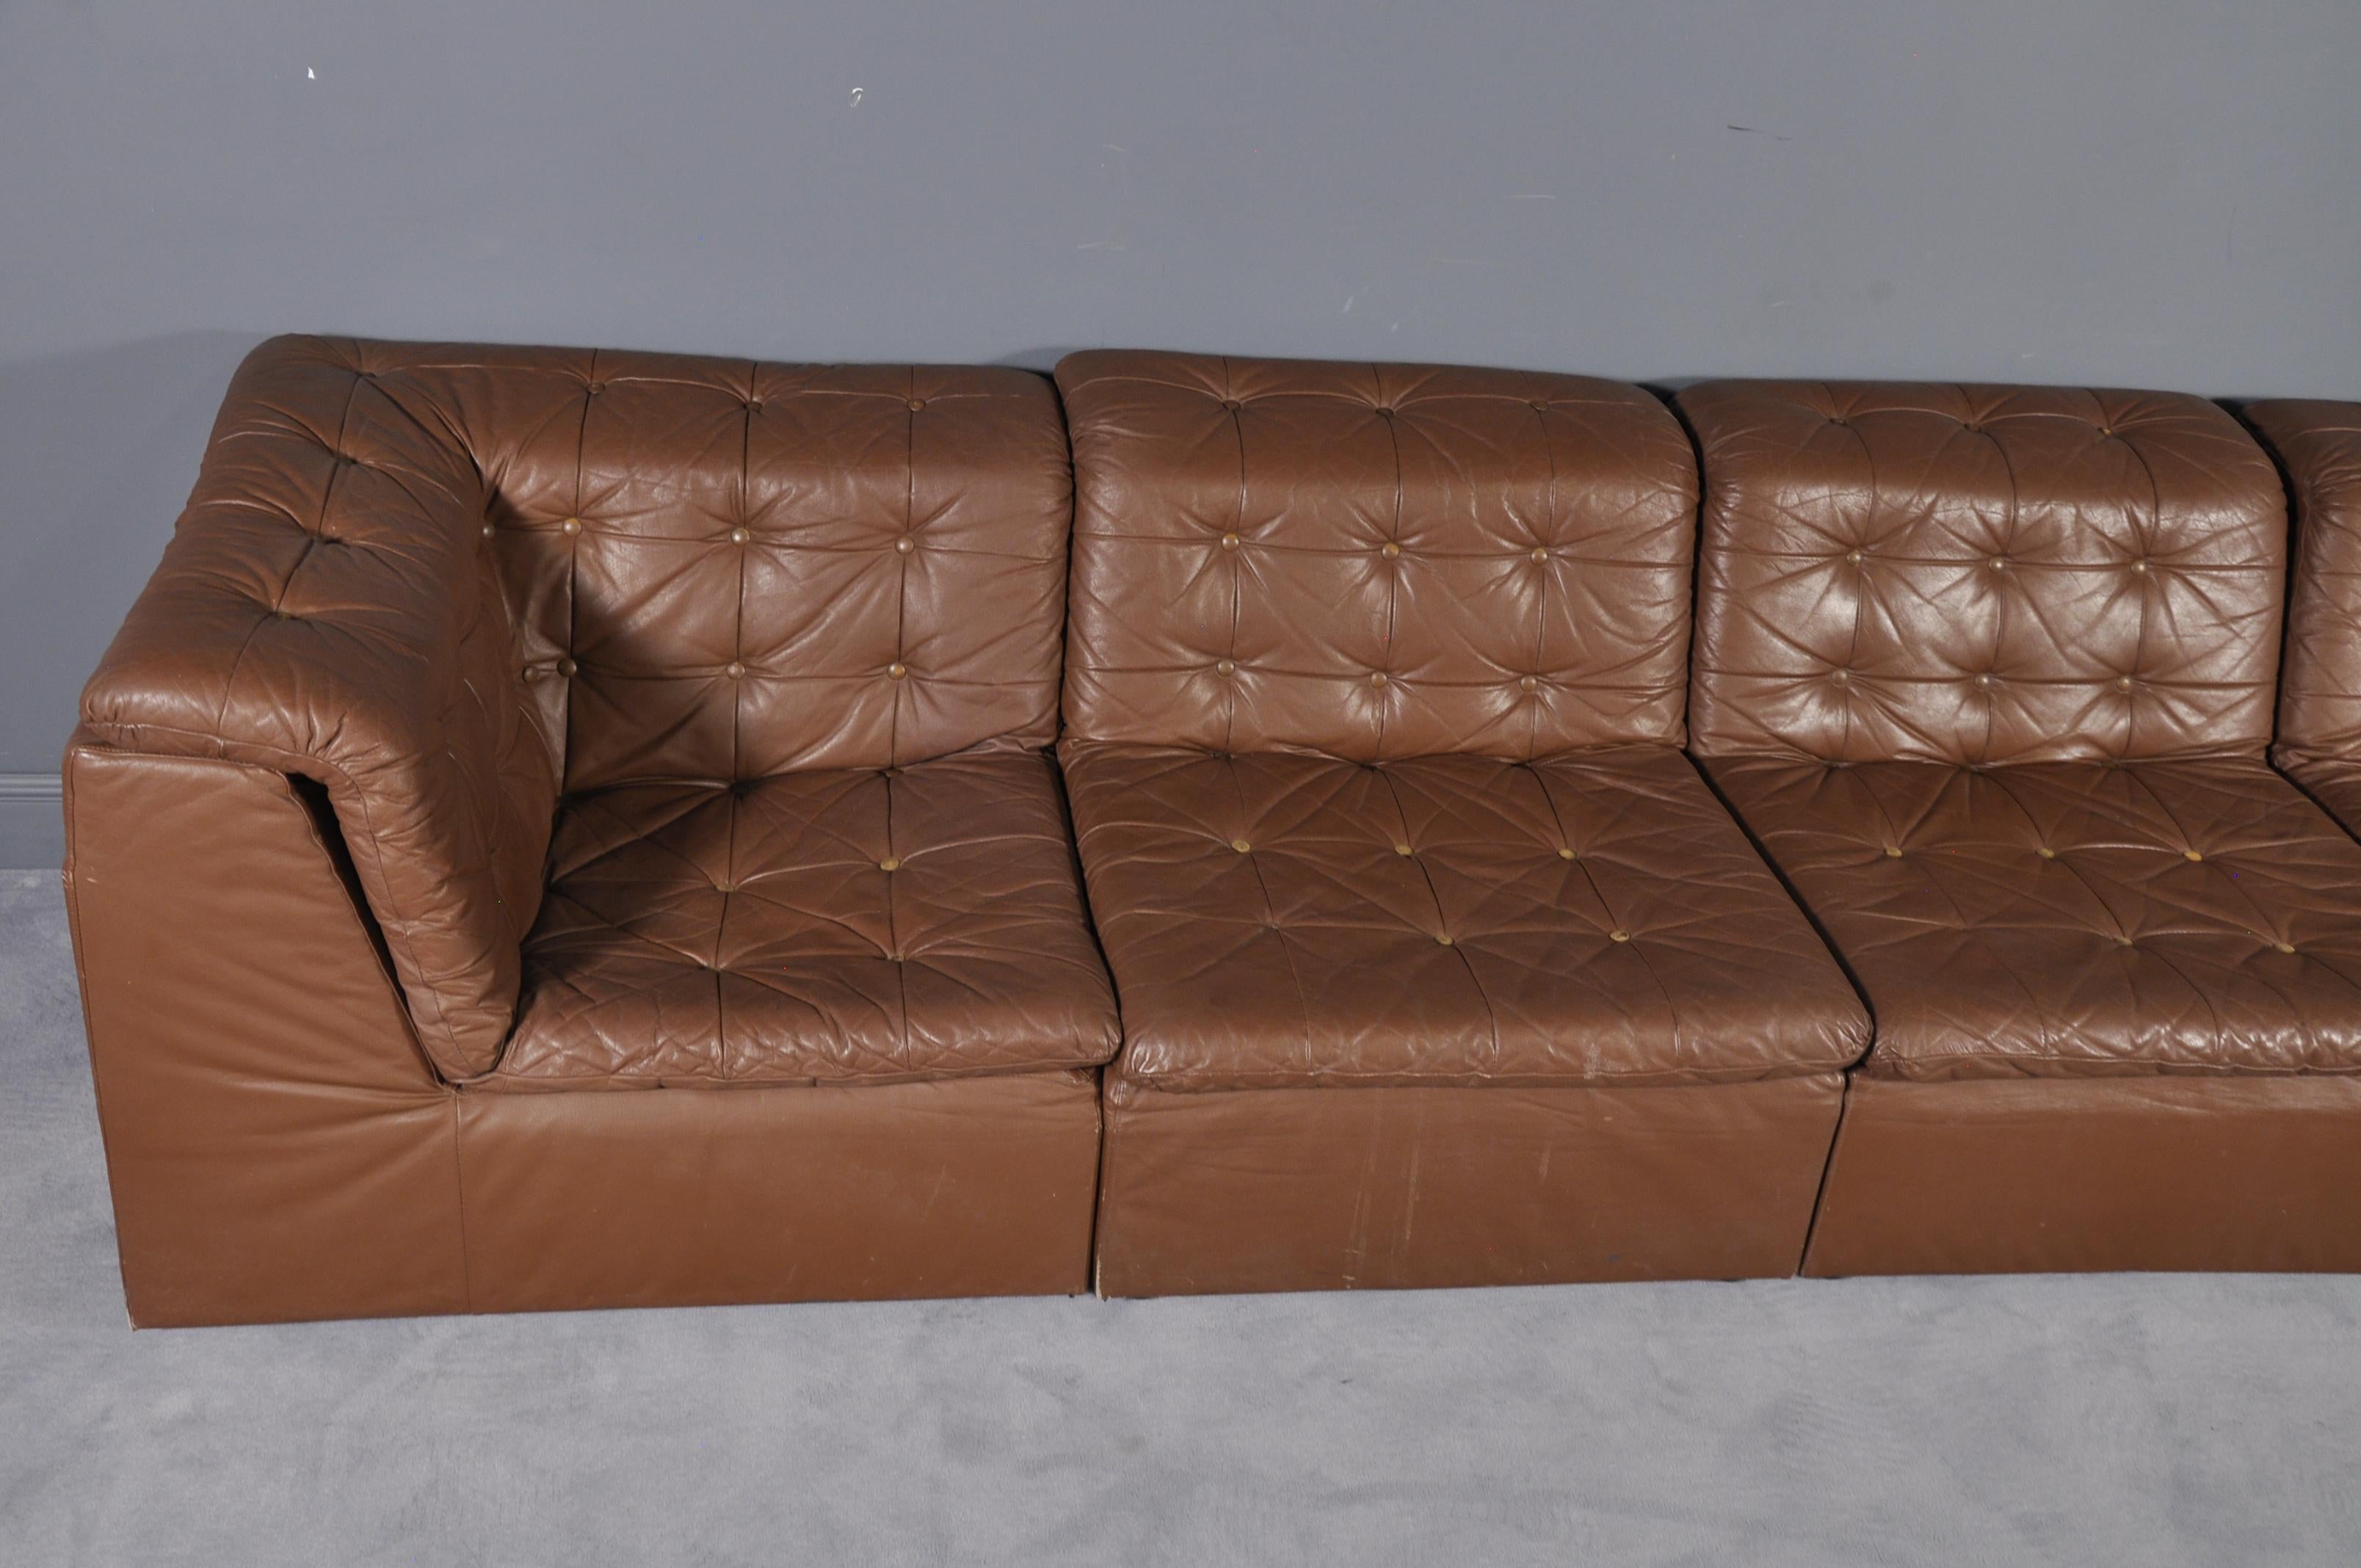 Cognac Leather “De Sede Style” Patchwork Modular Sofa from Laauser, Germany 1970 In Good Condition For Sale In Bucharest, RO